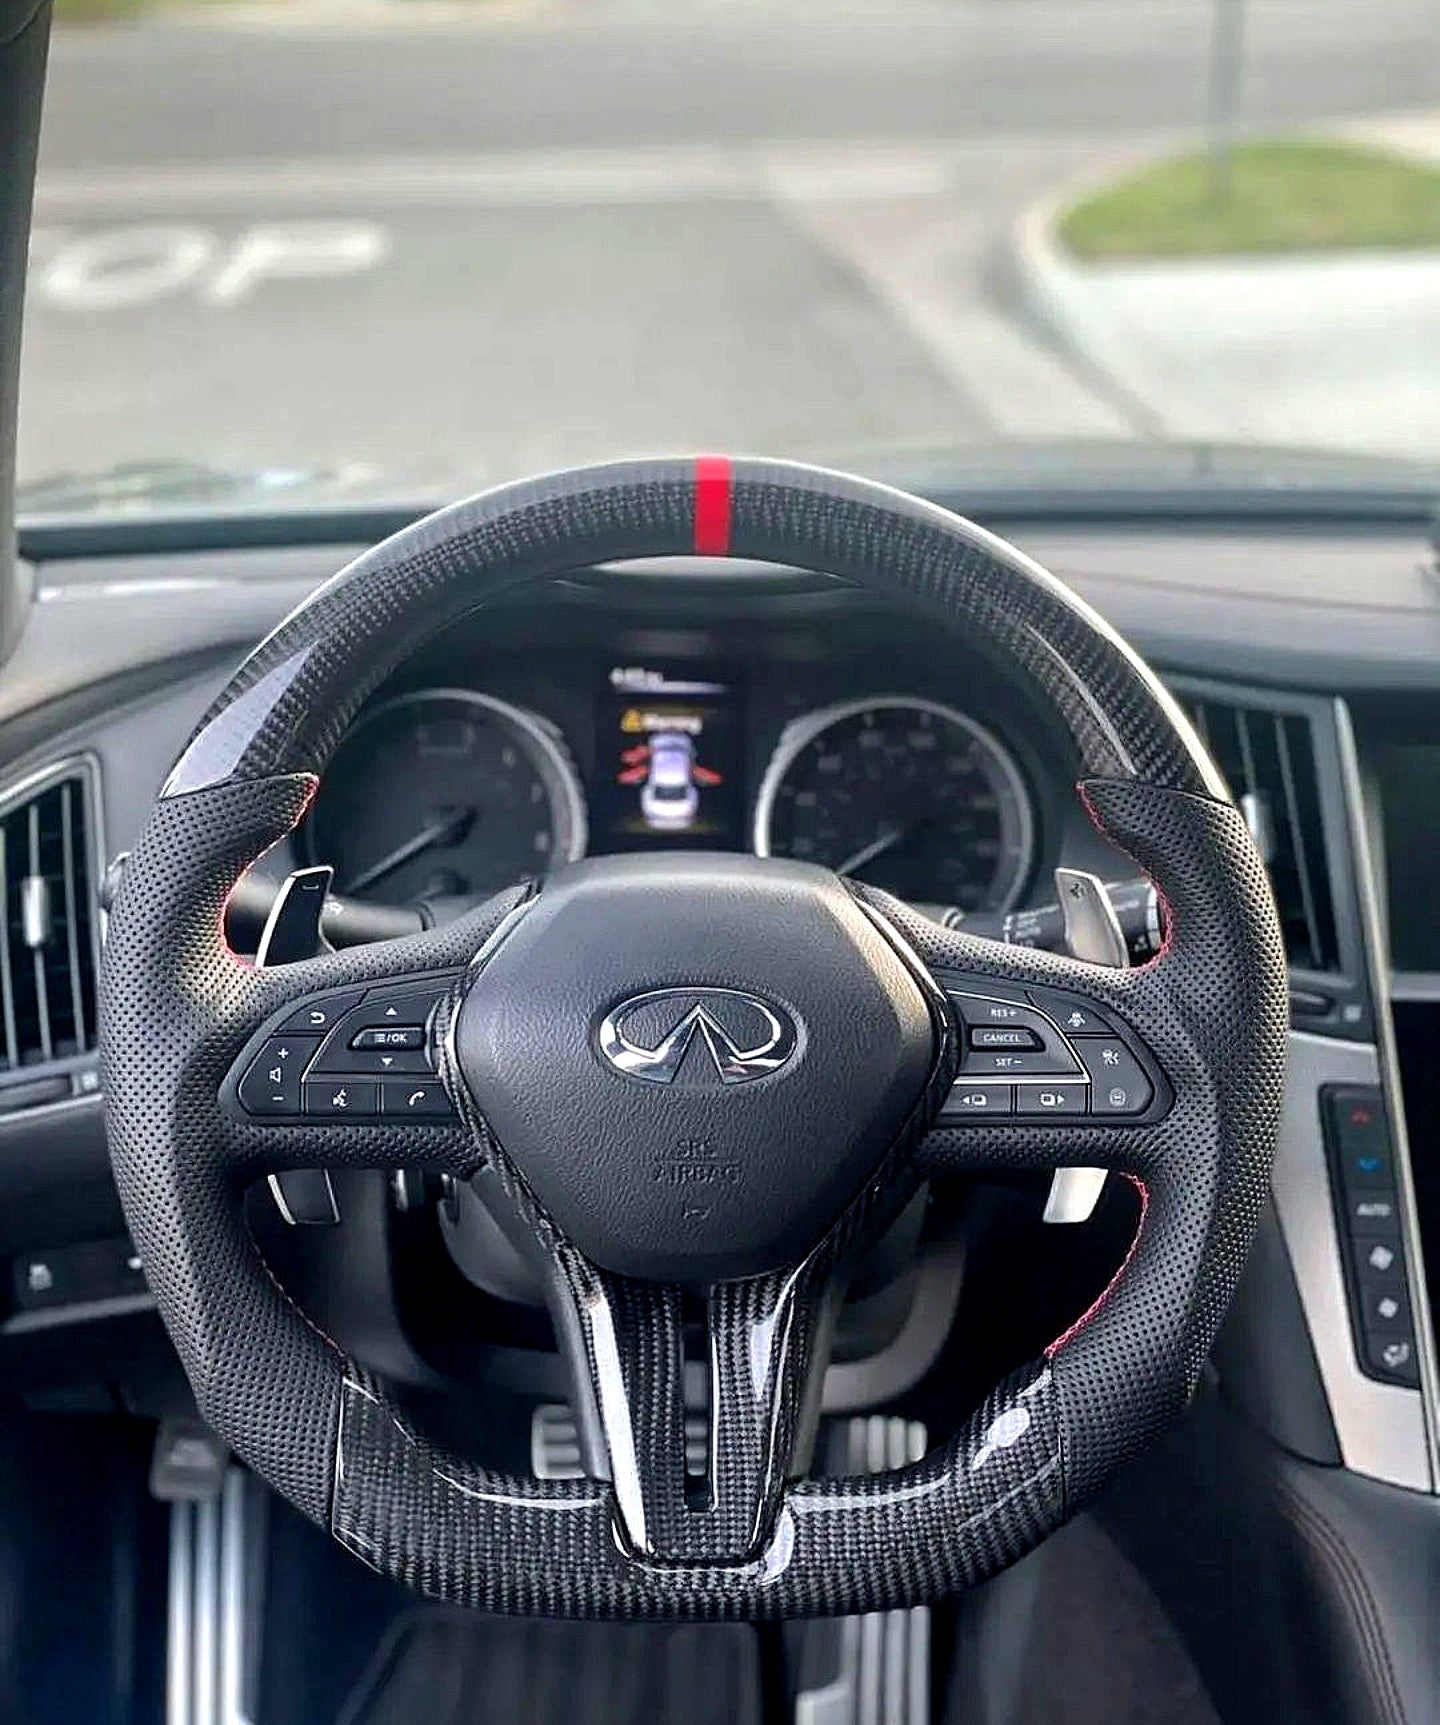 Jalisco's gray carbon fiber steering wheel with leather grips and red stripe for Infiniti Q50/Q60.